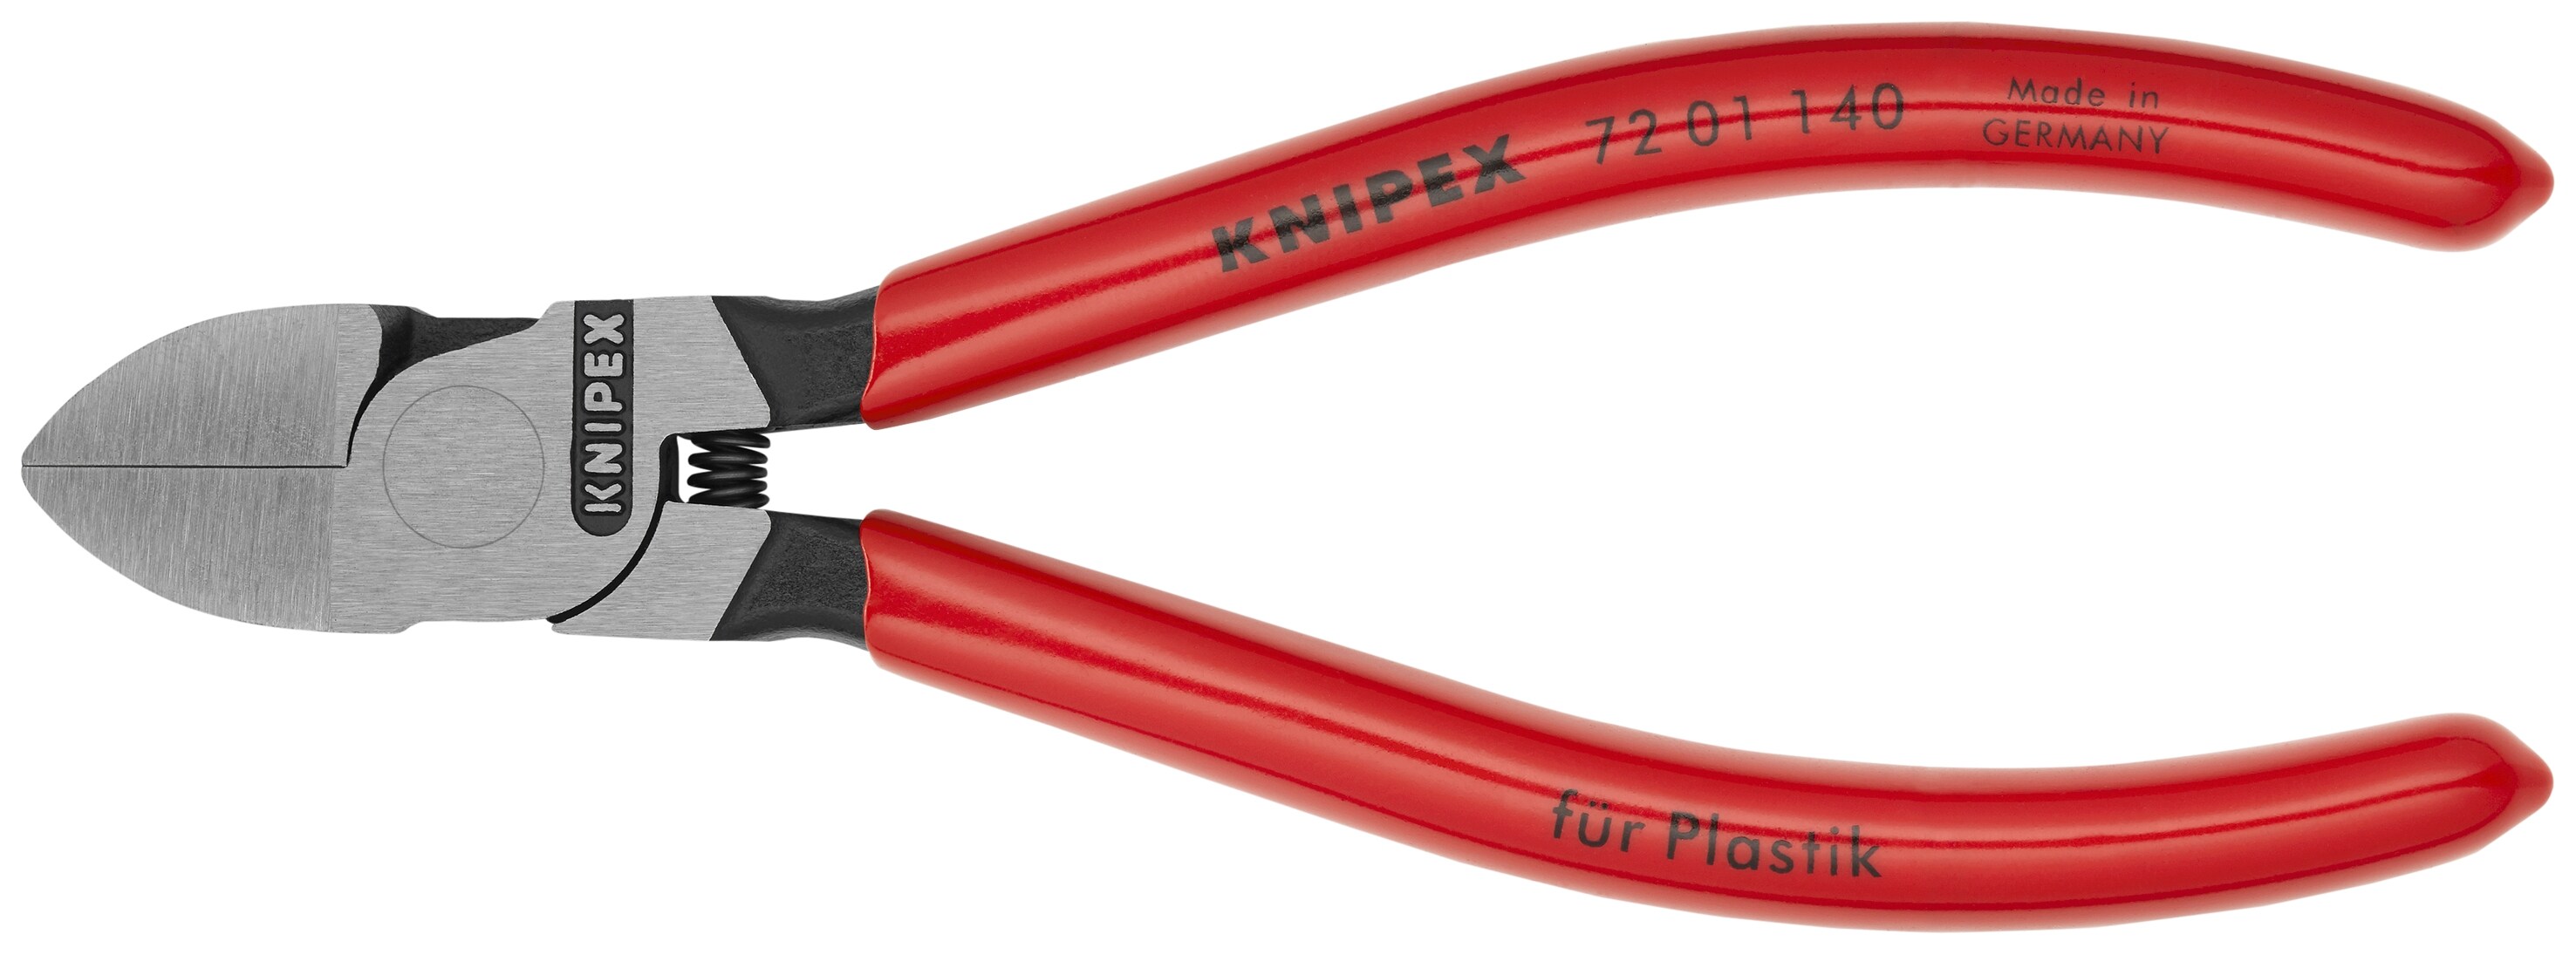 Knipex Cutter With Clinch Block